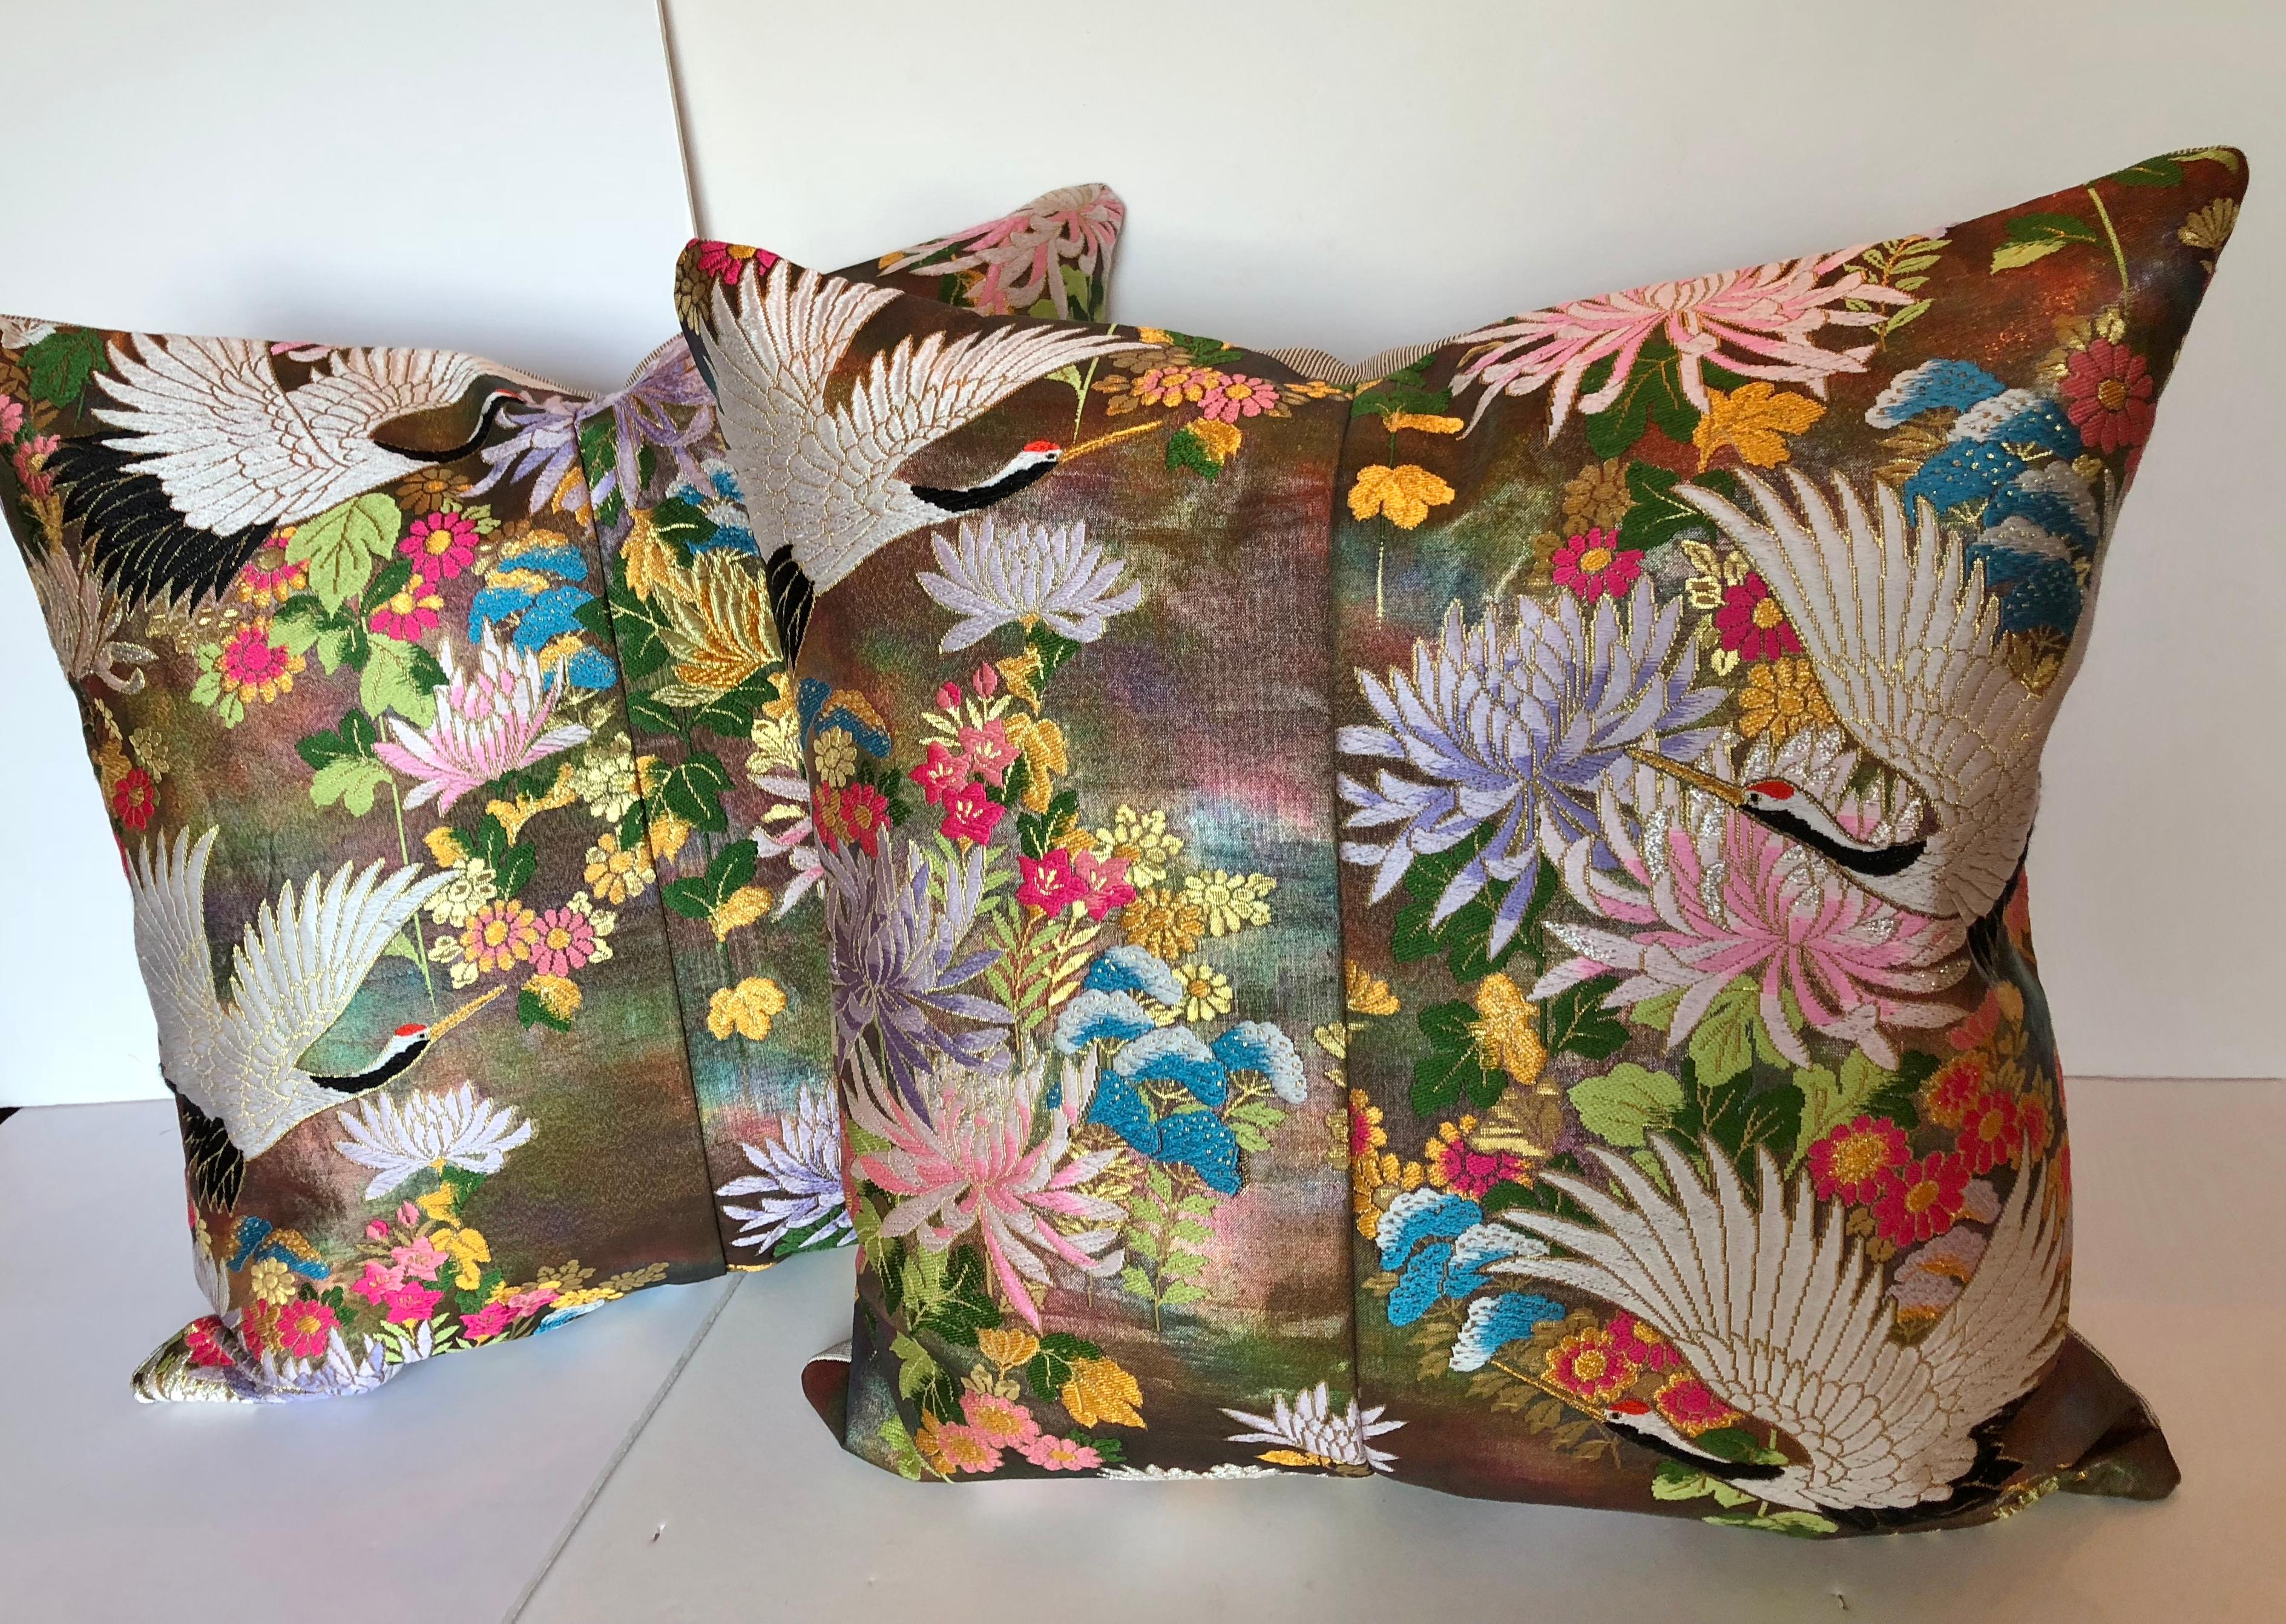 Custom pillows cut from a vintage Japanese Silk Uchikake, the traditional wedding kimono. Traditional Japanese flowers and birds with gold and silver metallic accents on an ombre background. Pillows are backed in silk, filled with an insert of 50/50